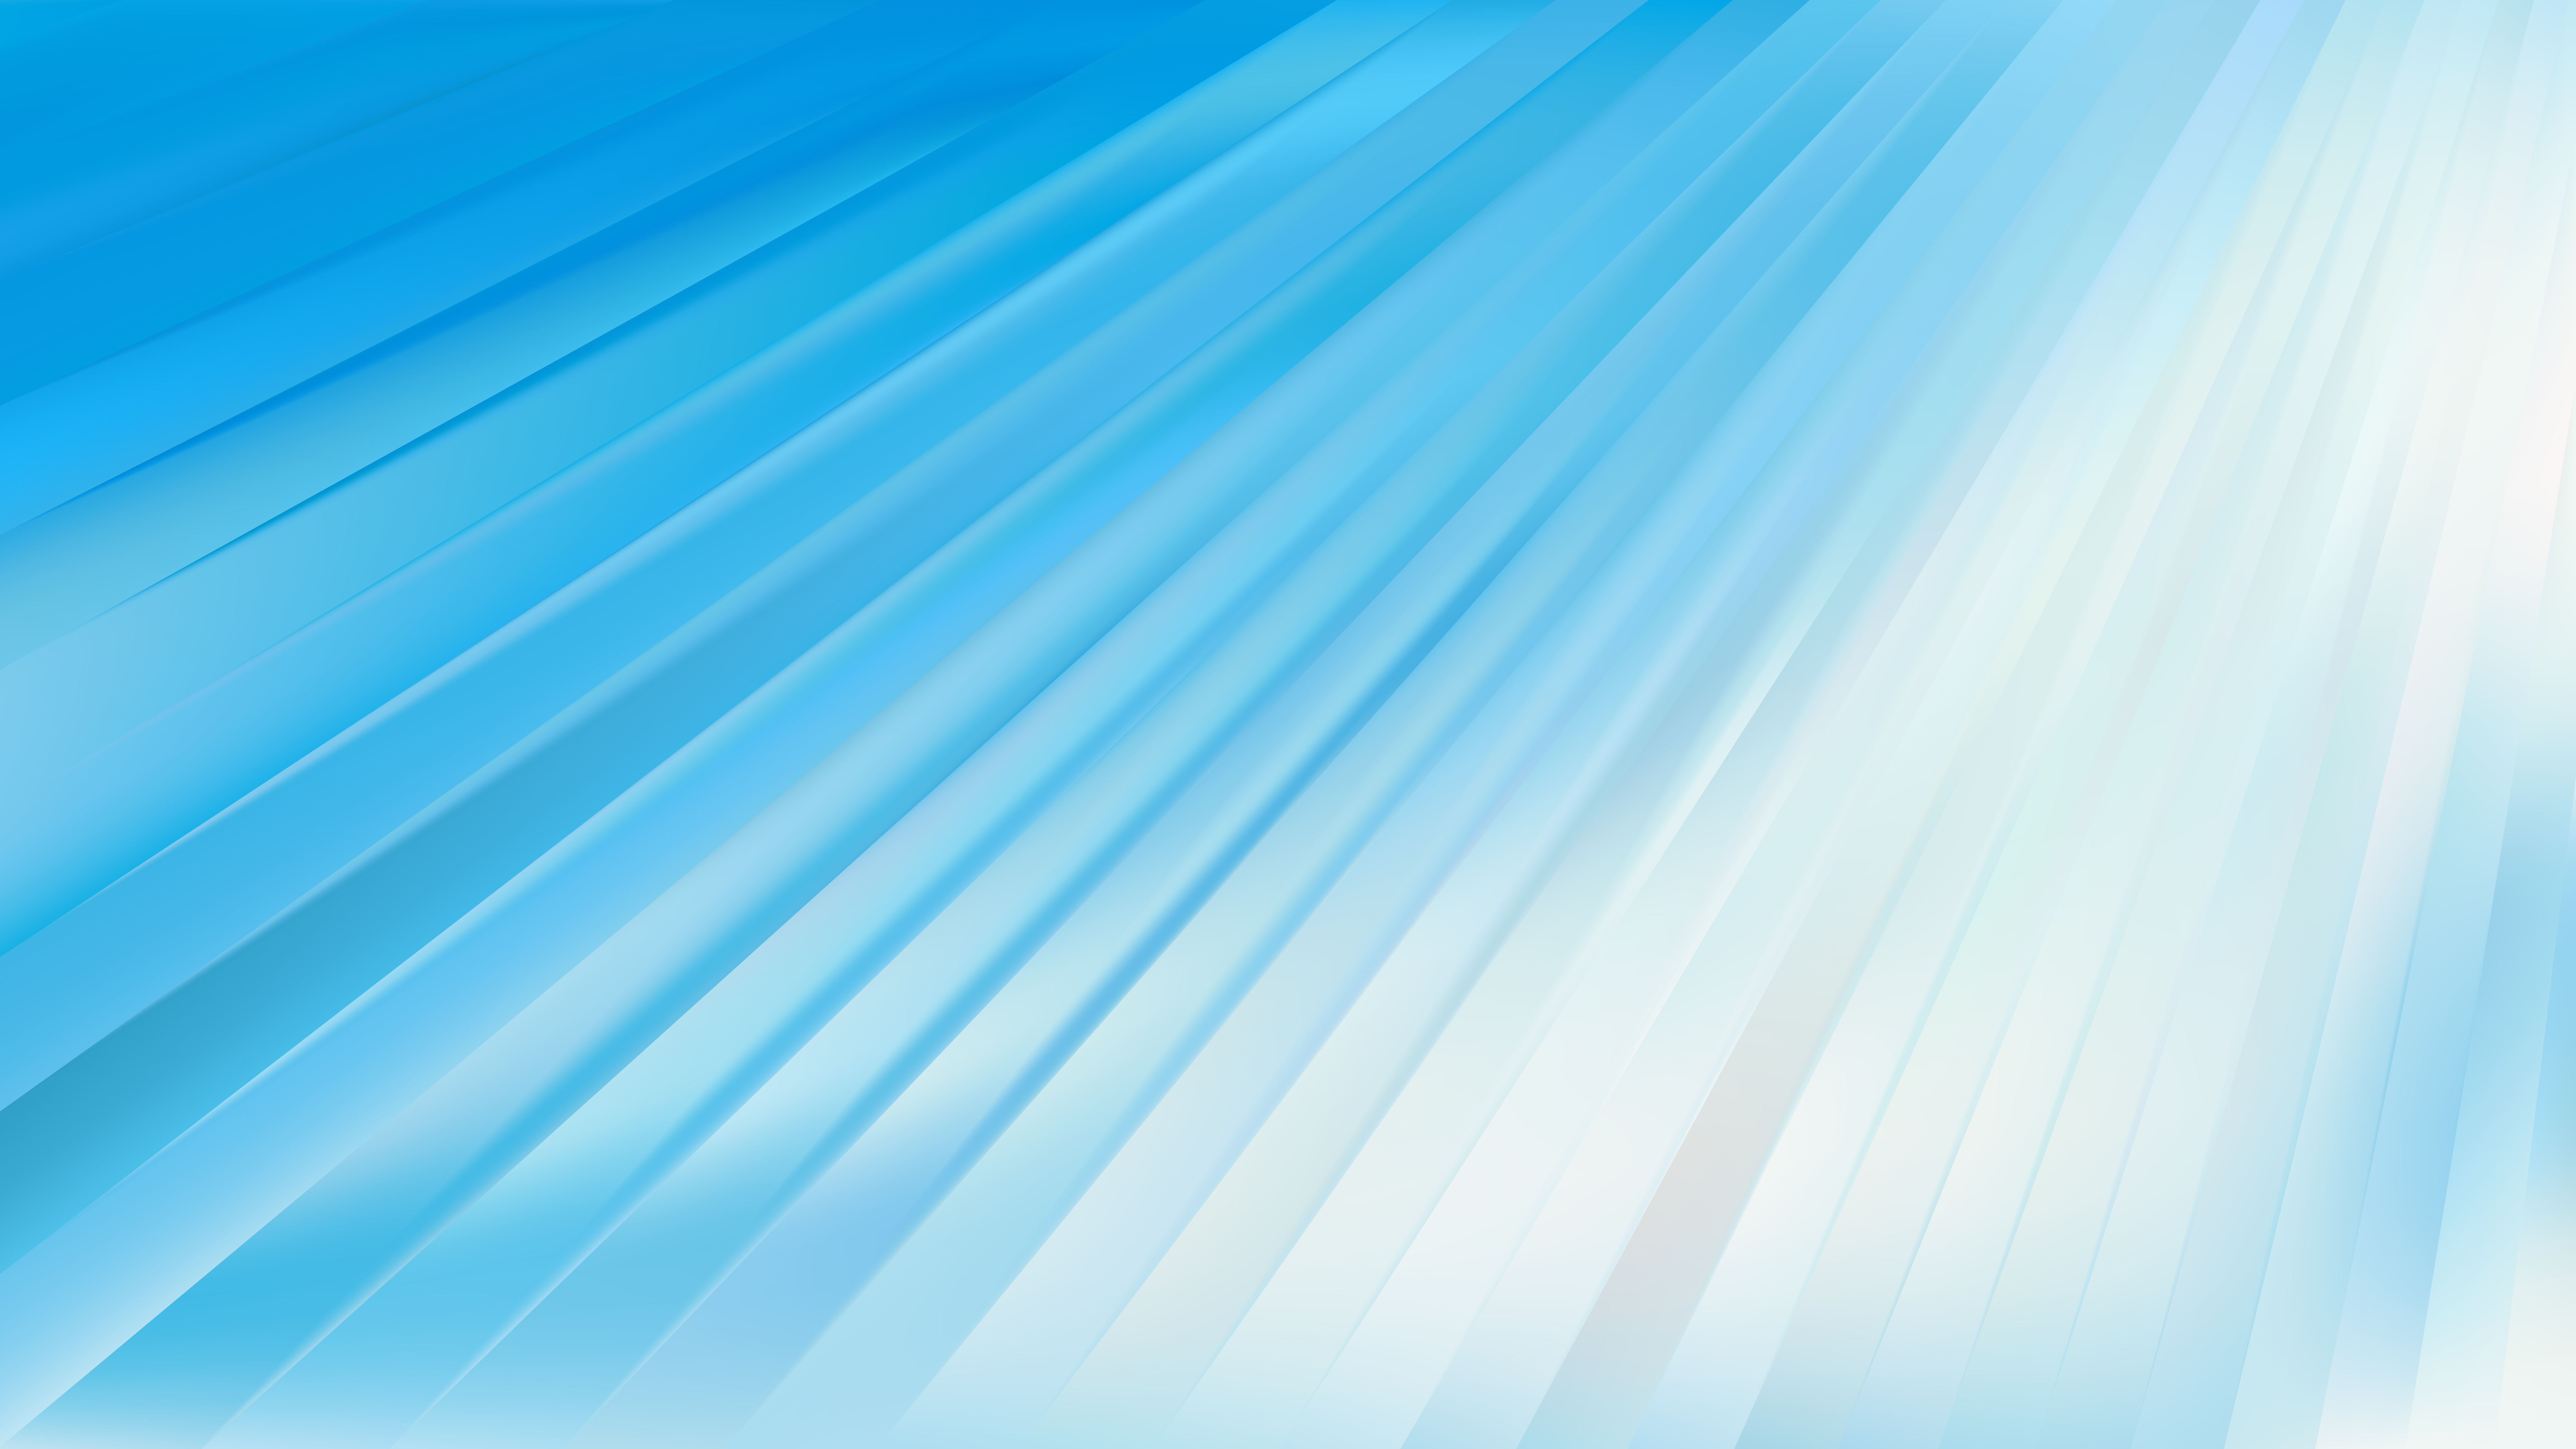 Free Abstract Light Blue Diagonal Lines Background